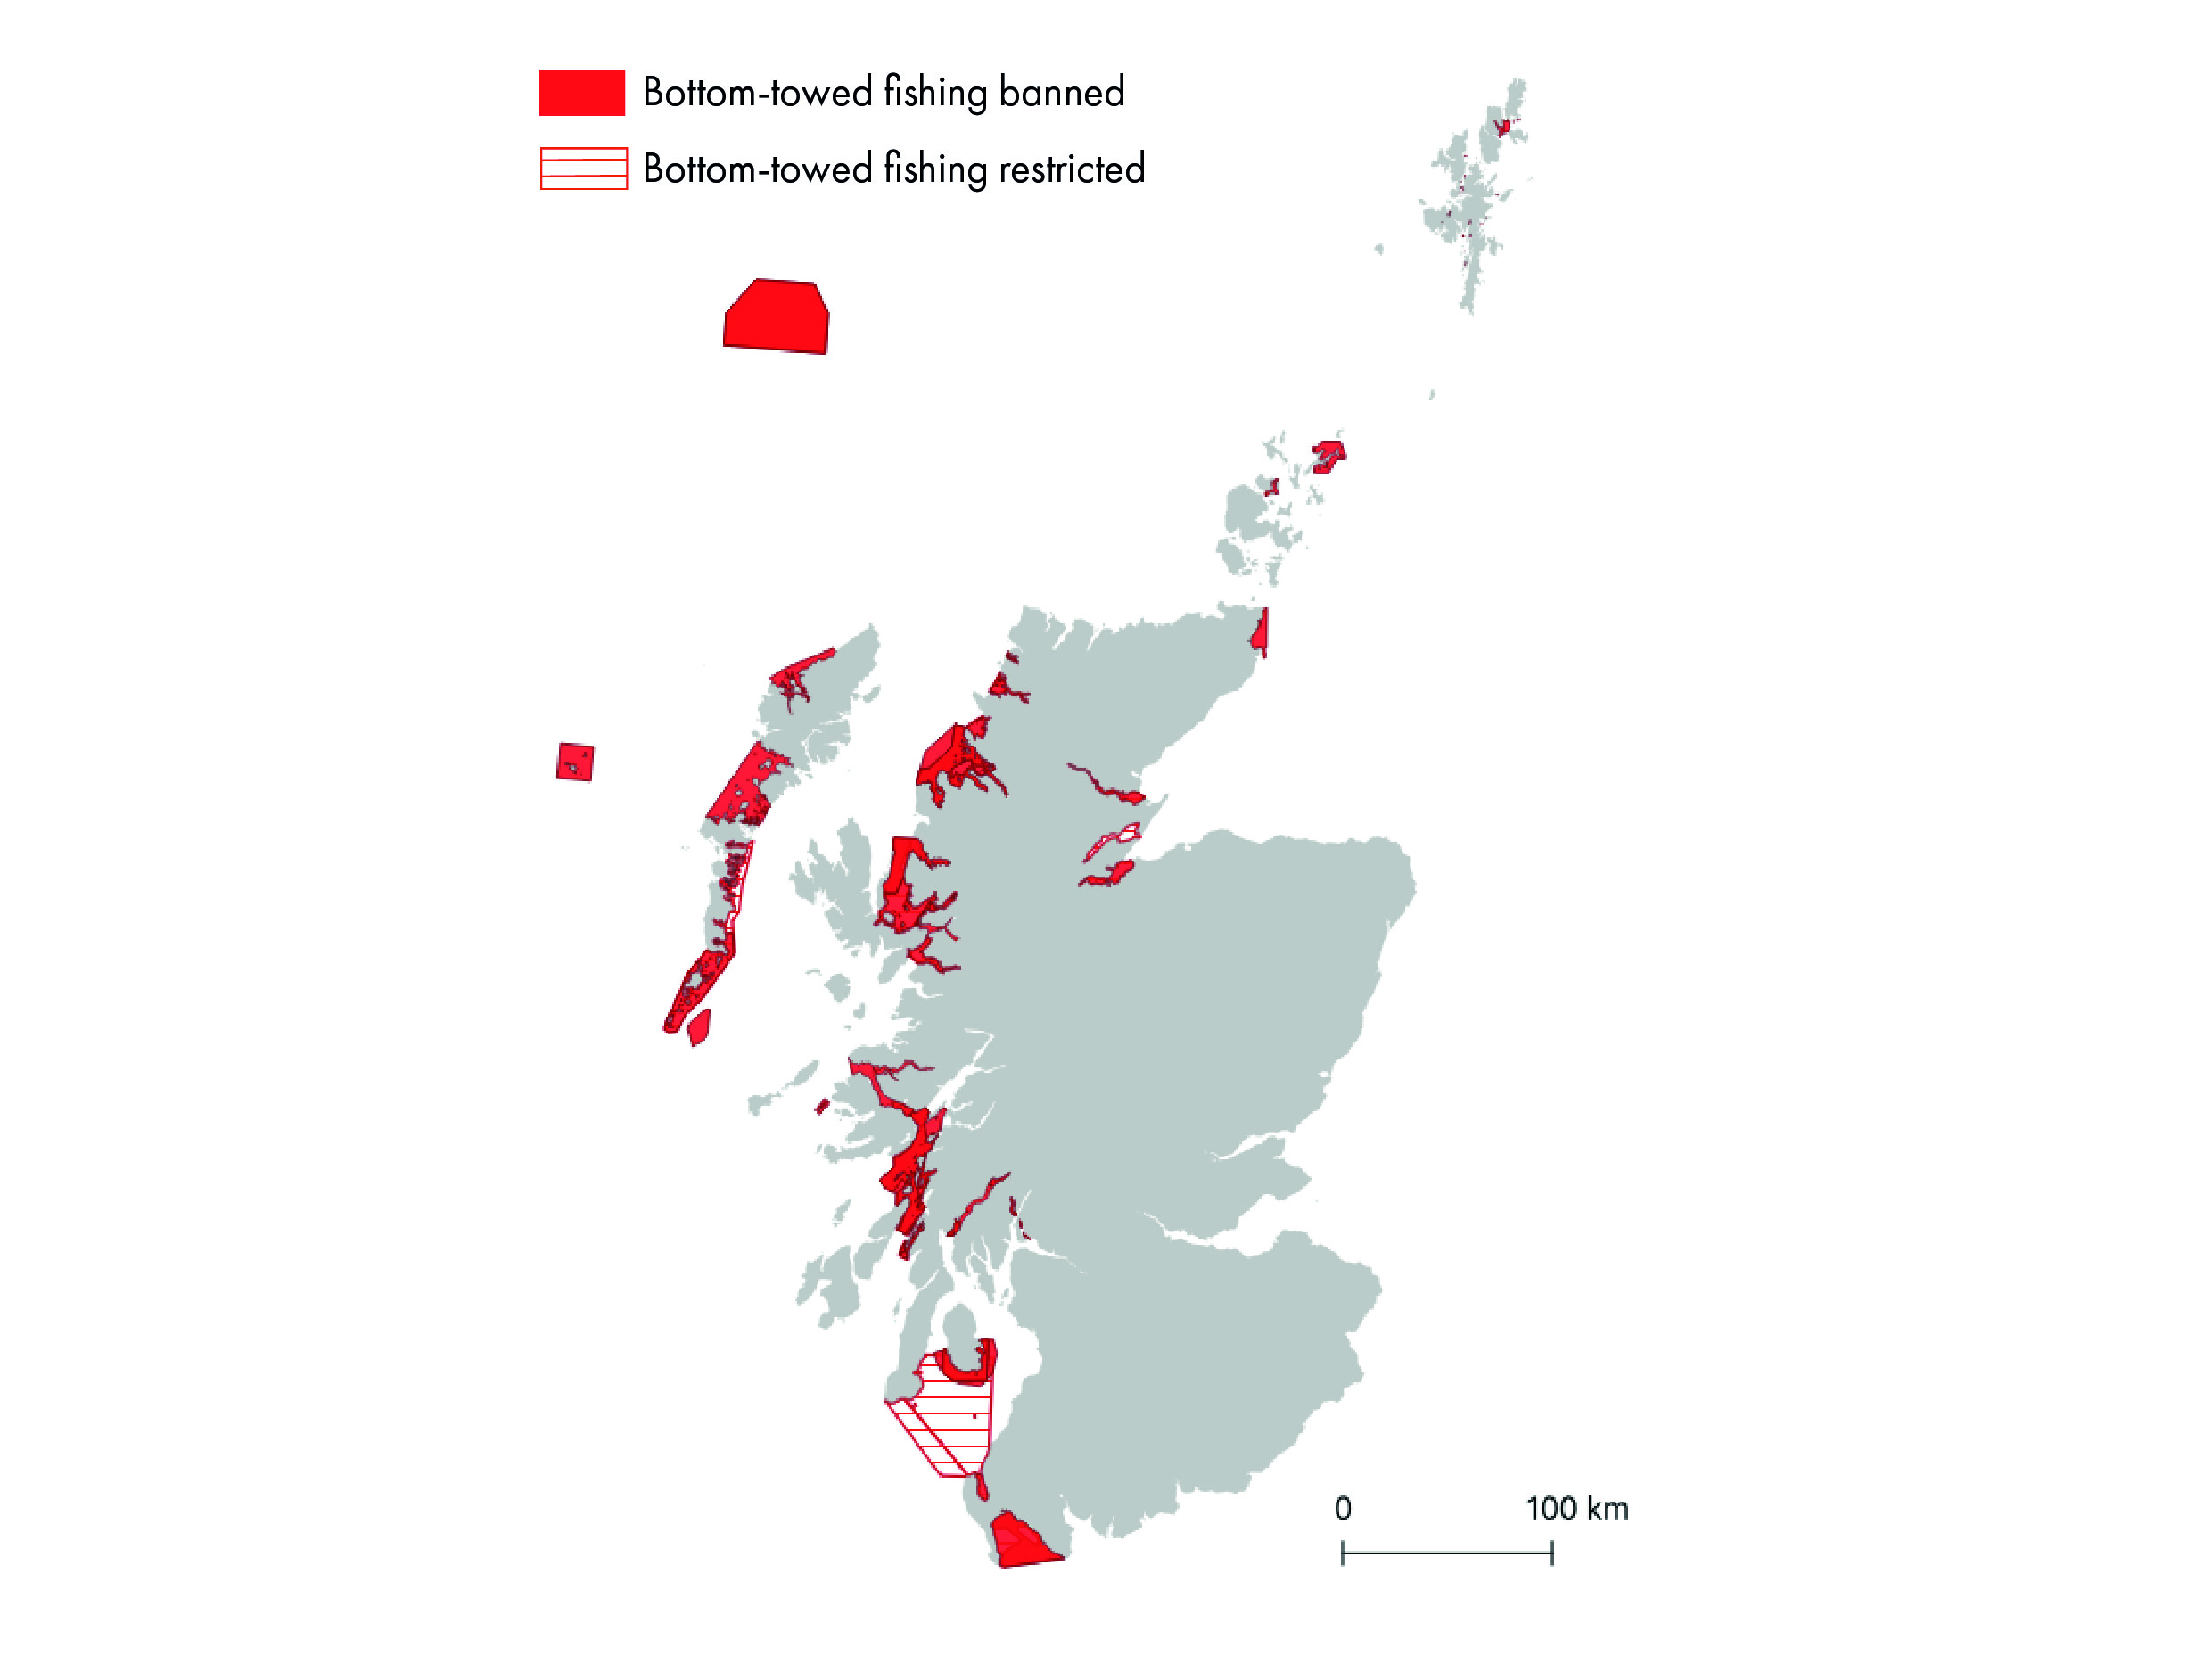 Map of Scotland showing inshore regions with restrictions or bans to trawling and/or dredging